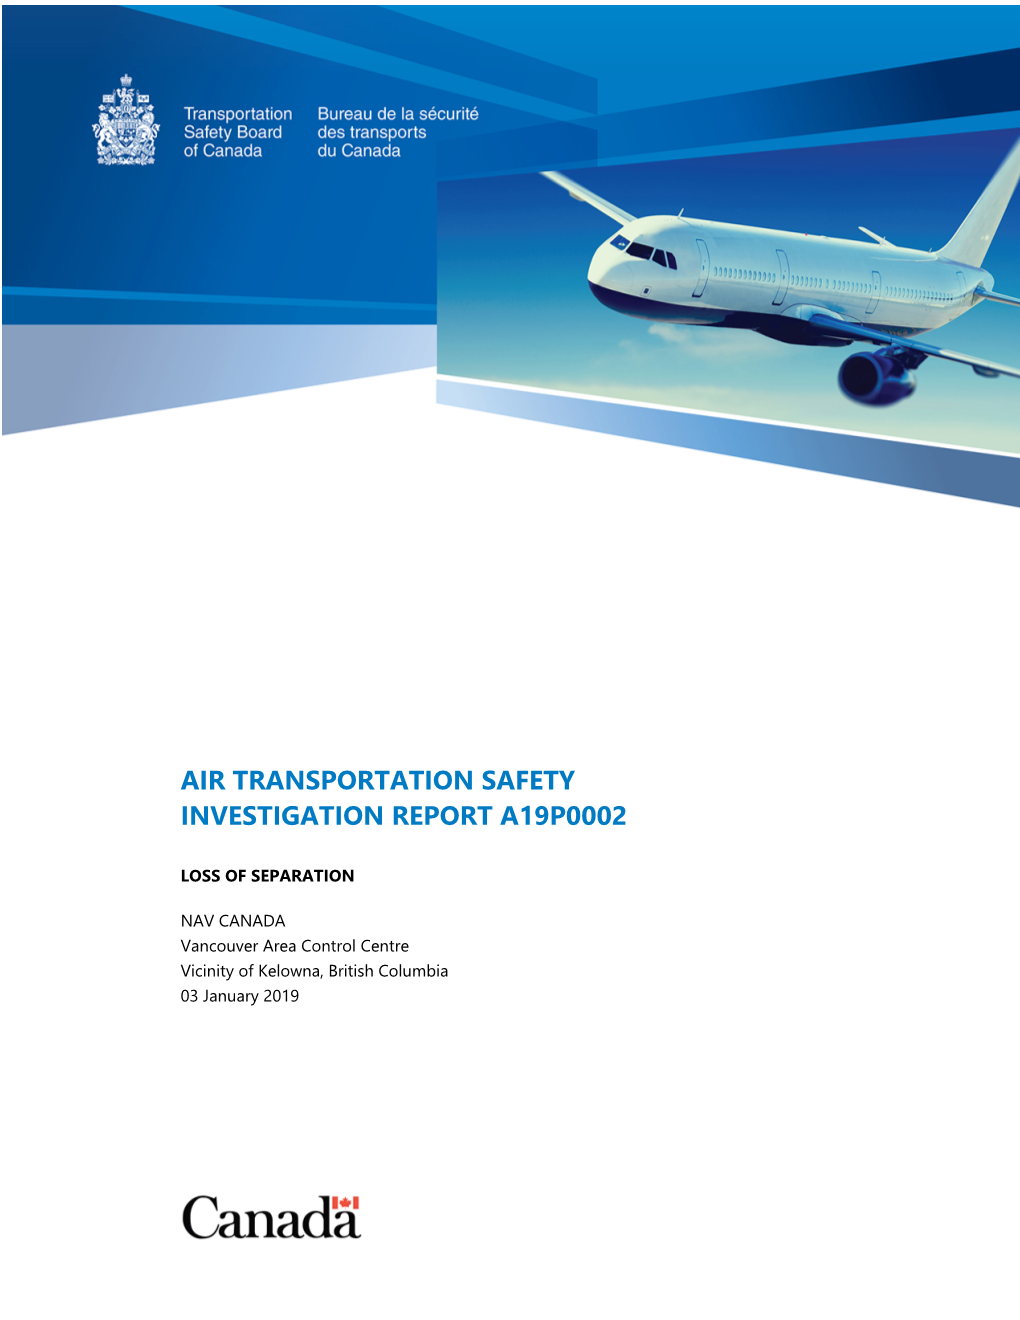 Air Transportation Safety Investigation Report A19p0002